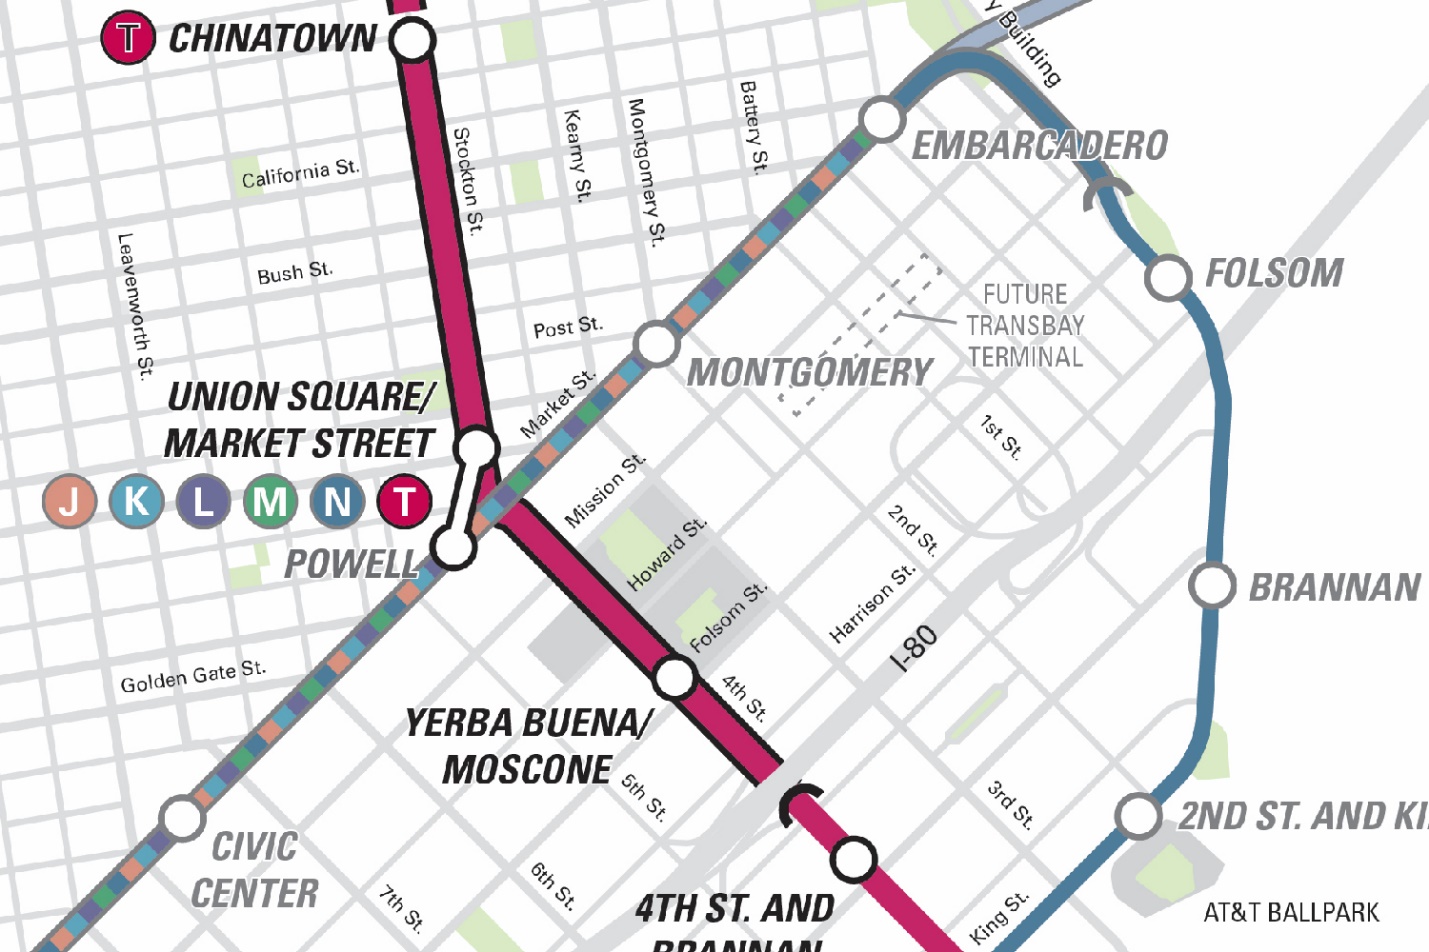 Central Subway project map shows a red line where the new line will be built up 4th Street and Stockton Street.